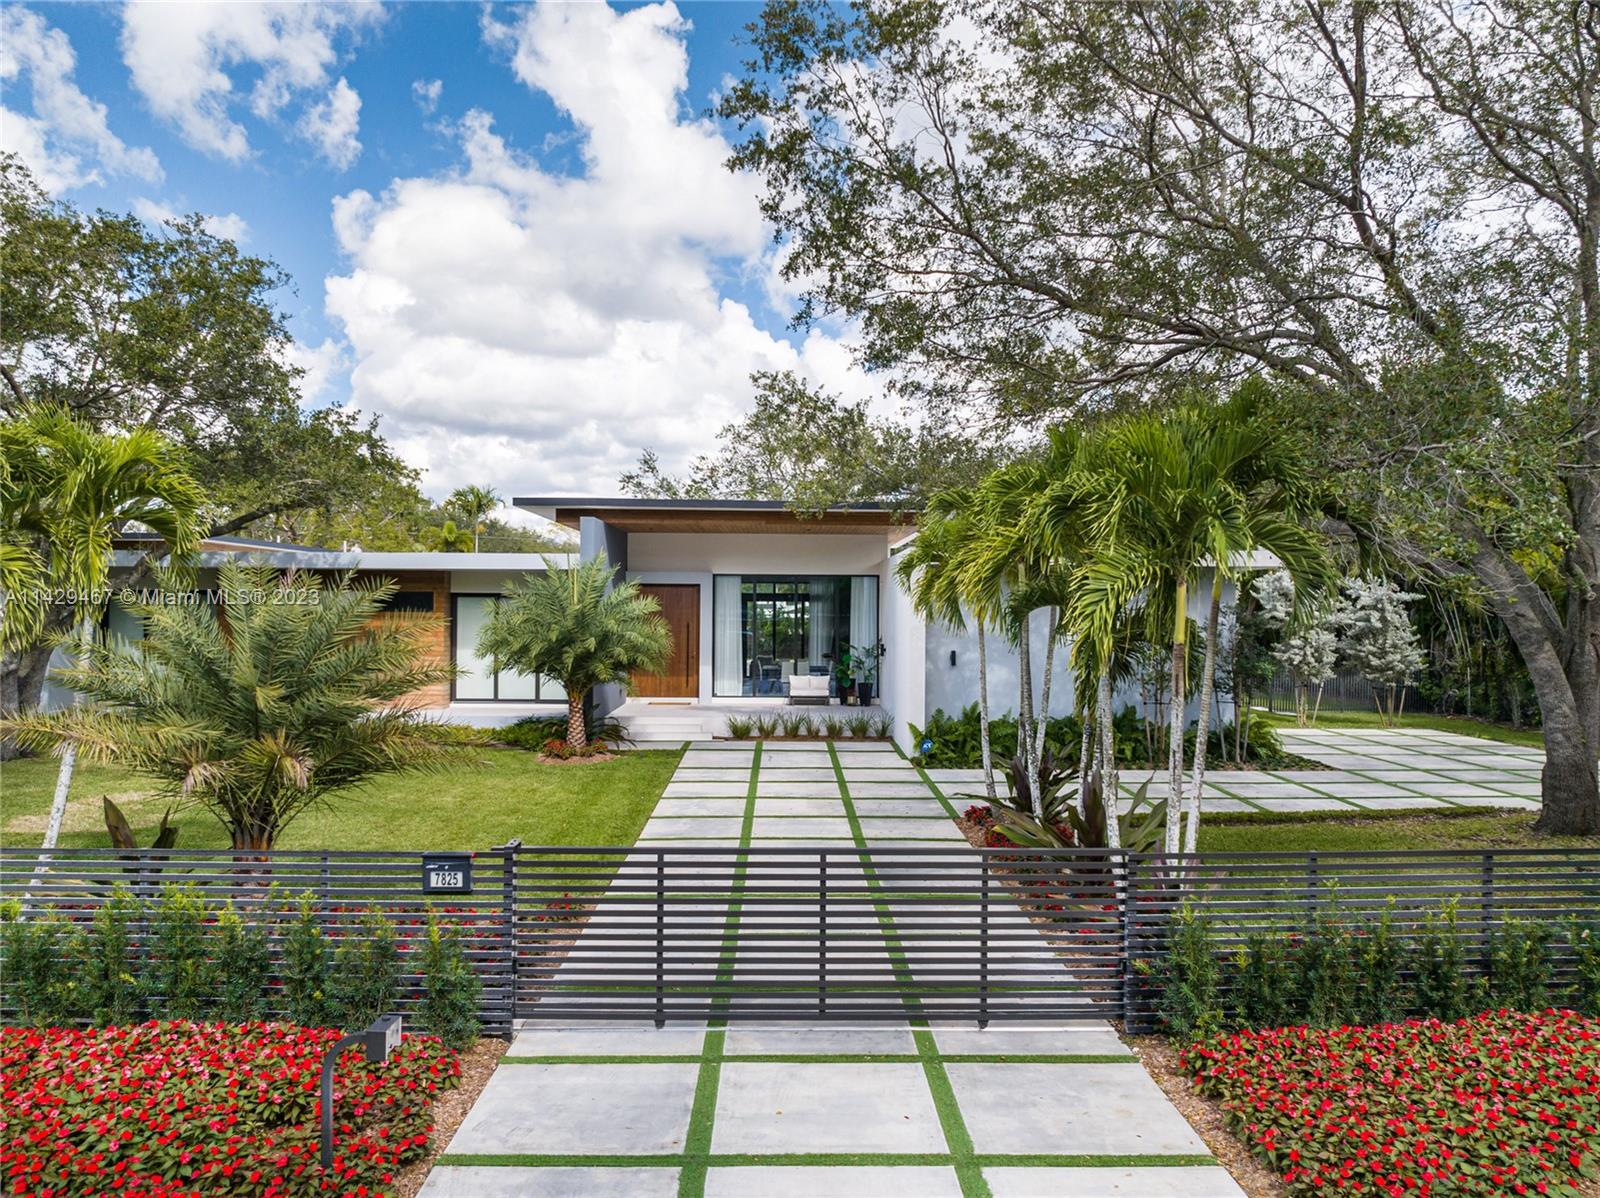 Beautiful Modern Construction in the Heart of Pinecrest. This spectacular home includes: 5 bedrooms, 5.5 bathrooms in the main house with a 1/1/ guest house, fully gated and sits on a 38,766 sqft lot. The main entrance greets you with an 11ft hurricane proof Mahogany pivot door and the throughout the home you have high ceilings ranging from 10 to 14 ft. Fully equipped with Italkraft kitchen cabinets, quartz counters and Miele, Wolf and Liebherr appliances. All bedrooms are fully ensuite and  are completed with Mia Cucina closets.Beautiful Modern Home in the Heart of Pinecrest. This spectacular home includes: 5 bedroom, 5.5 bathroom and sits on a 38,766 sqft lot. Must See!